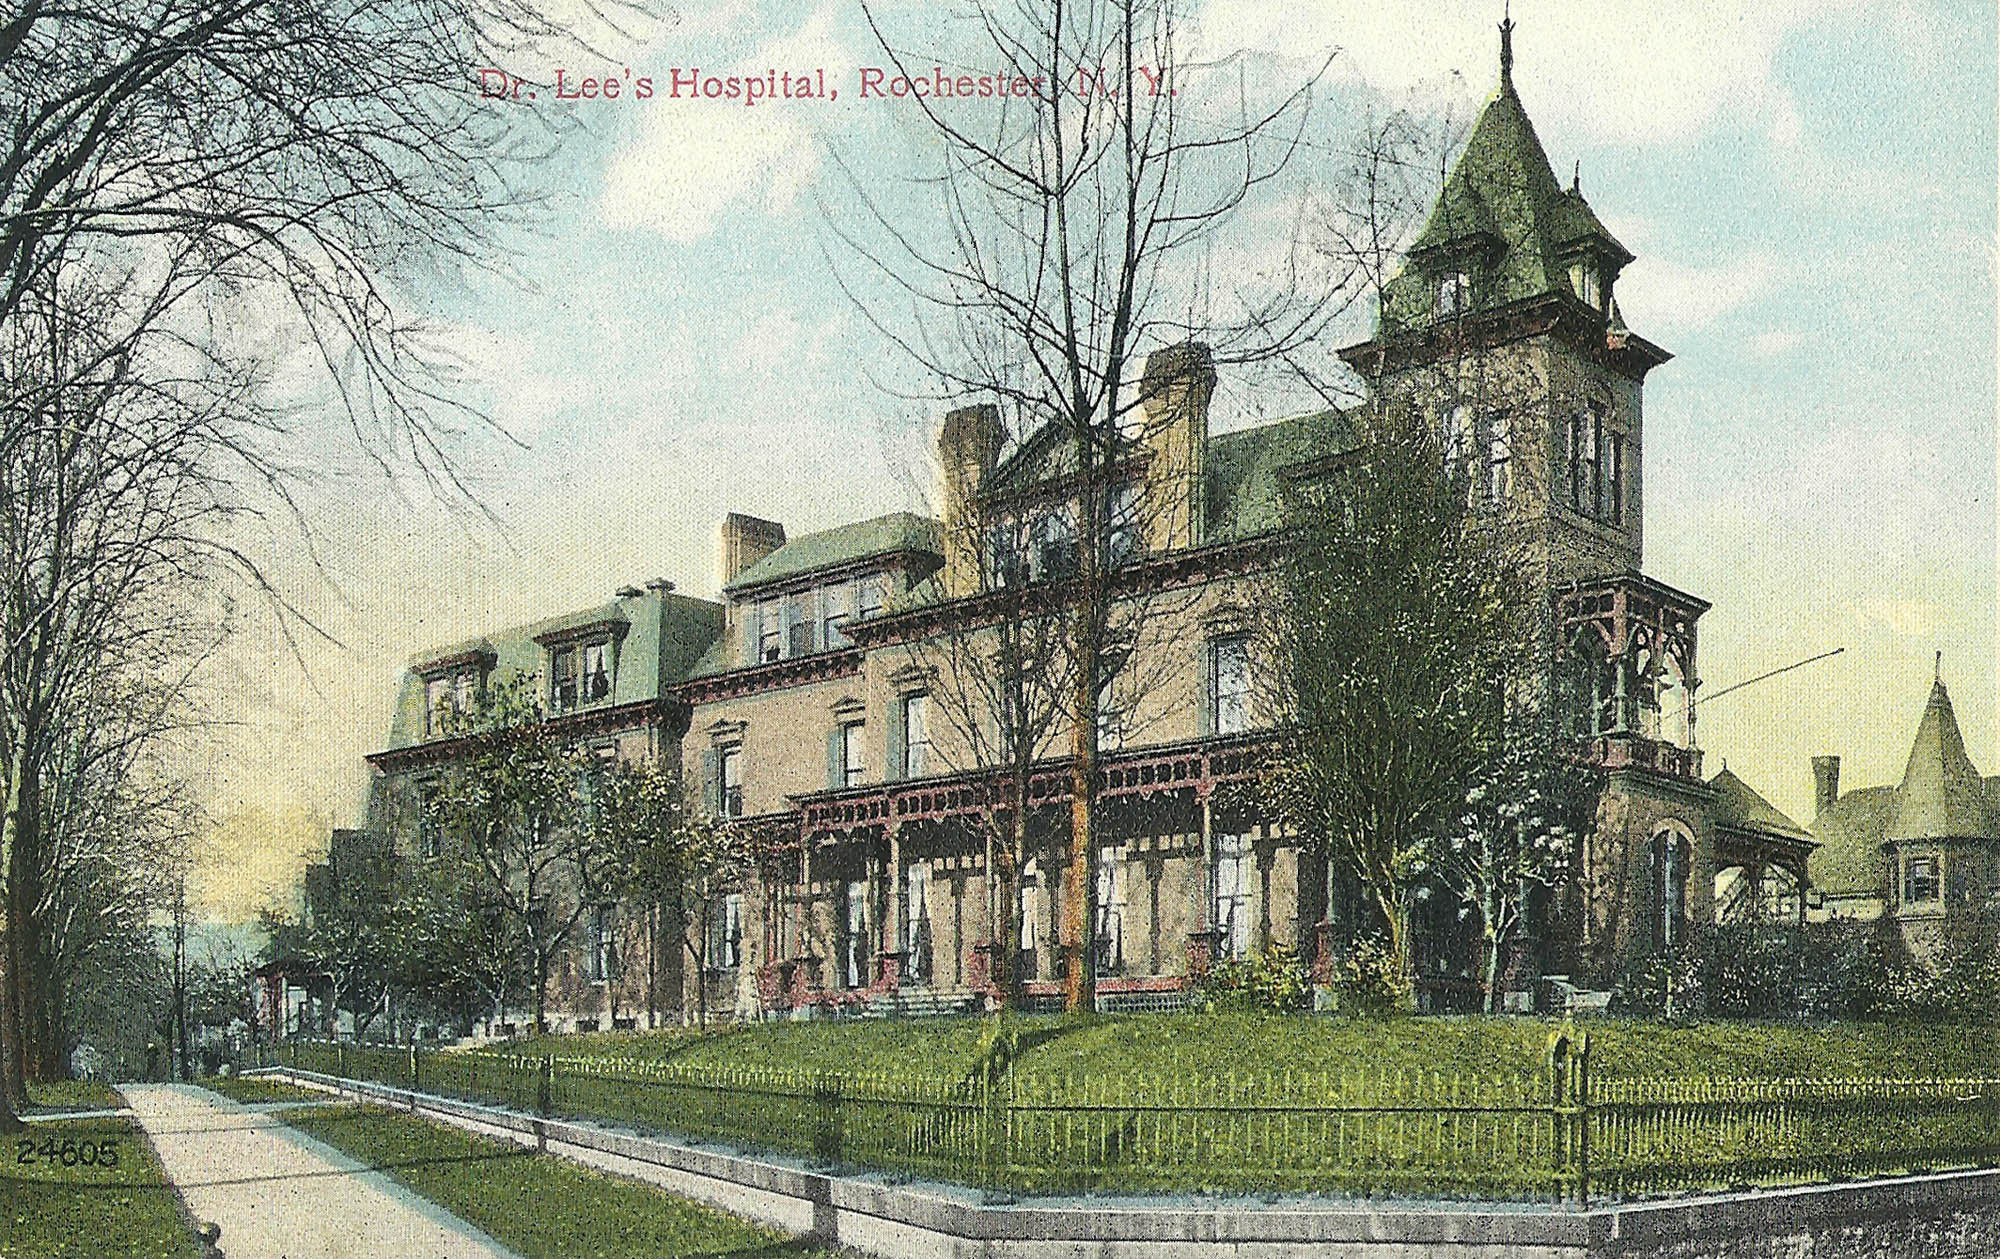 Dr. Lee's Hospital (#1), Rochester